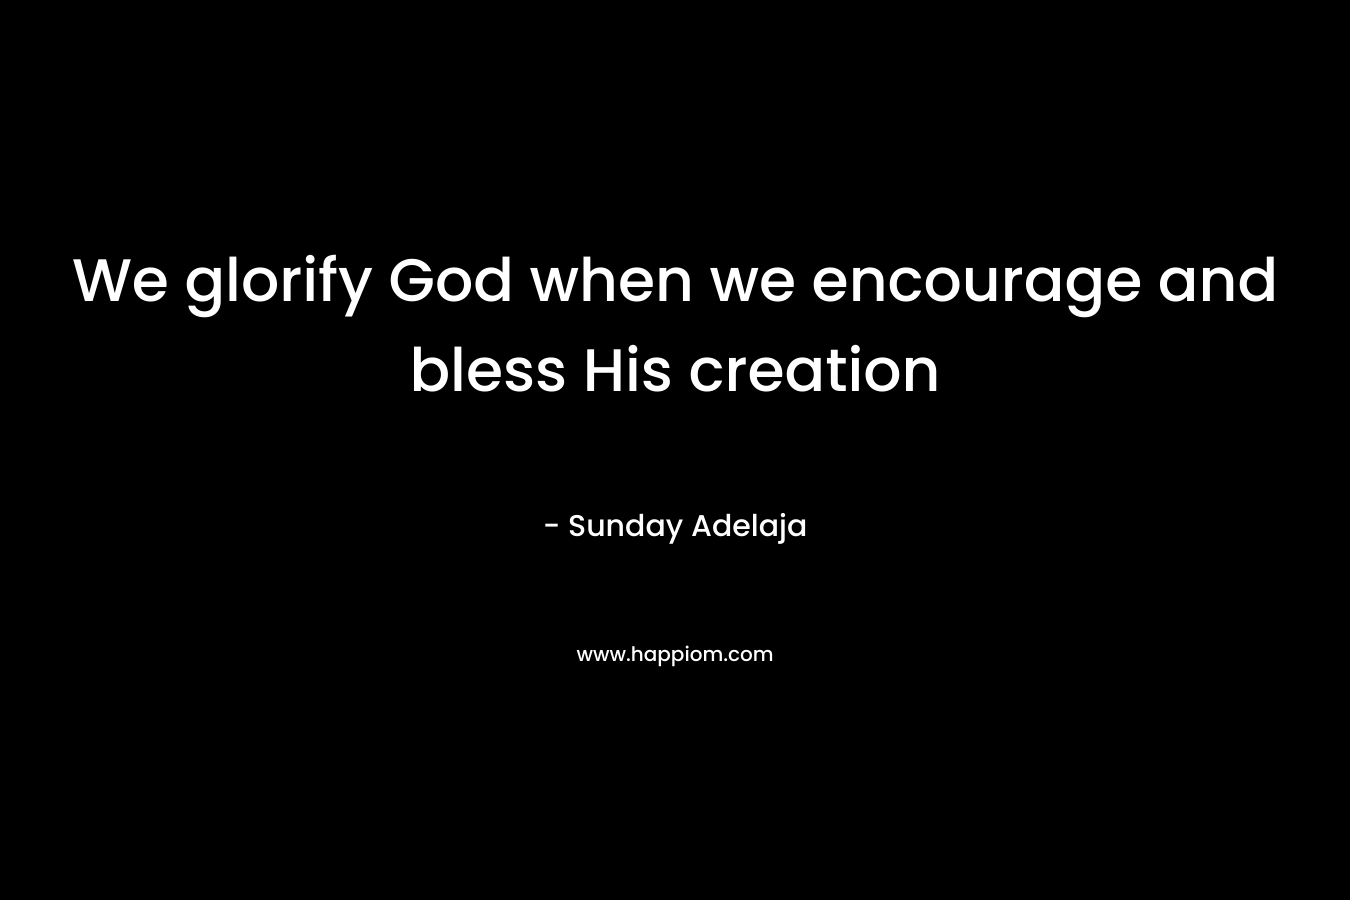 We glorify God when we encourage and bless His creation